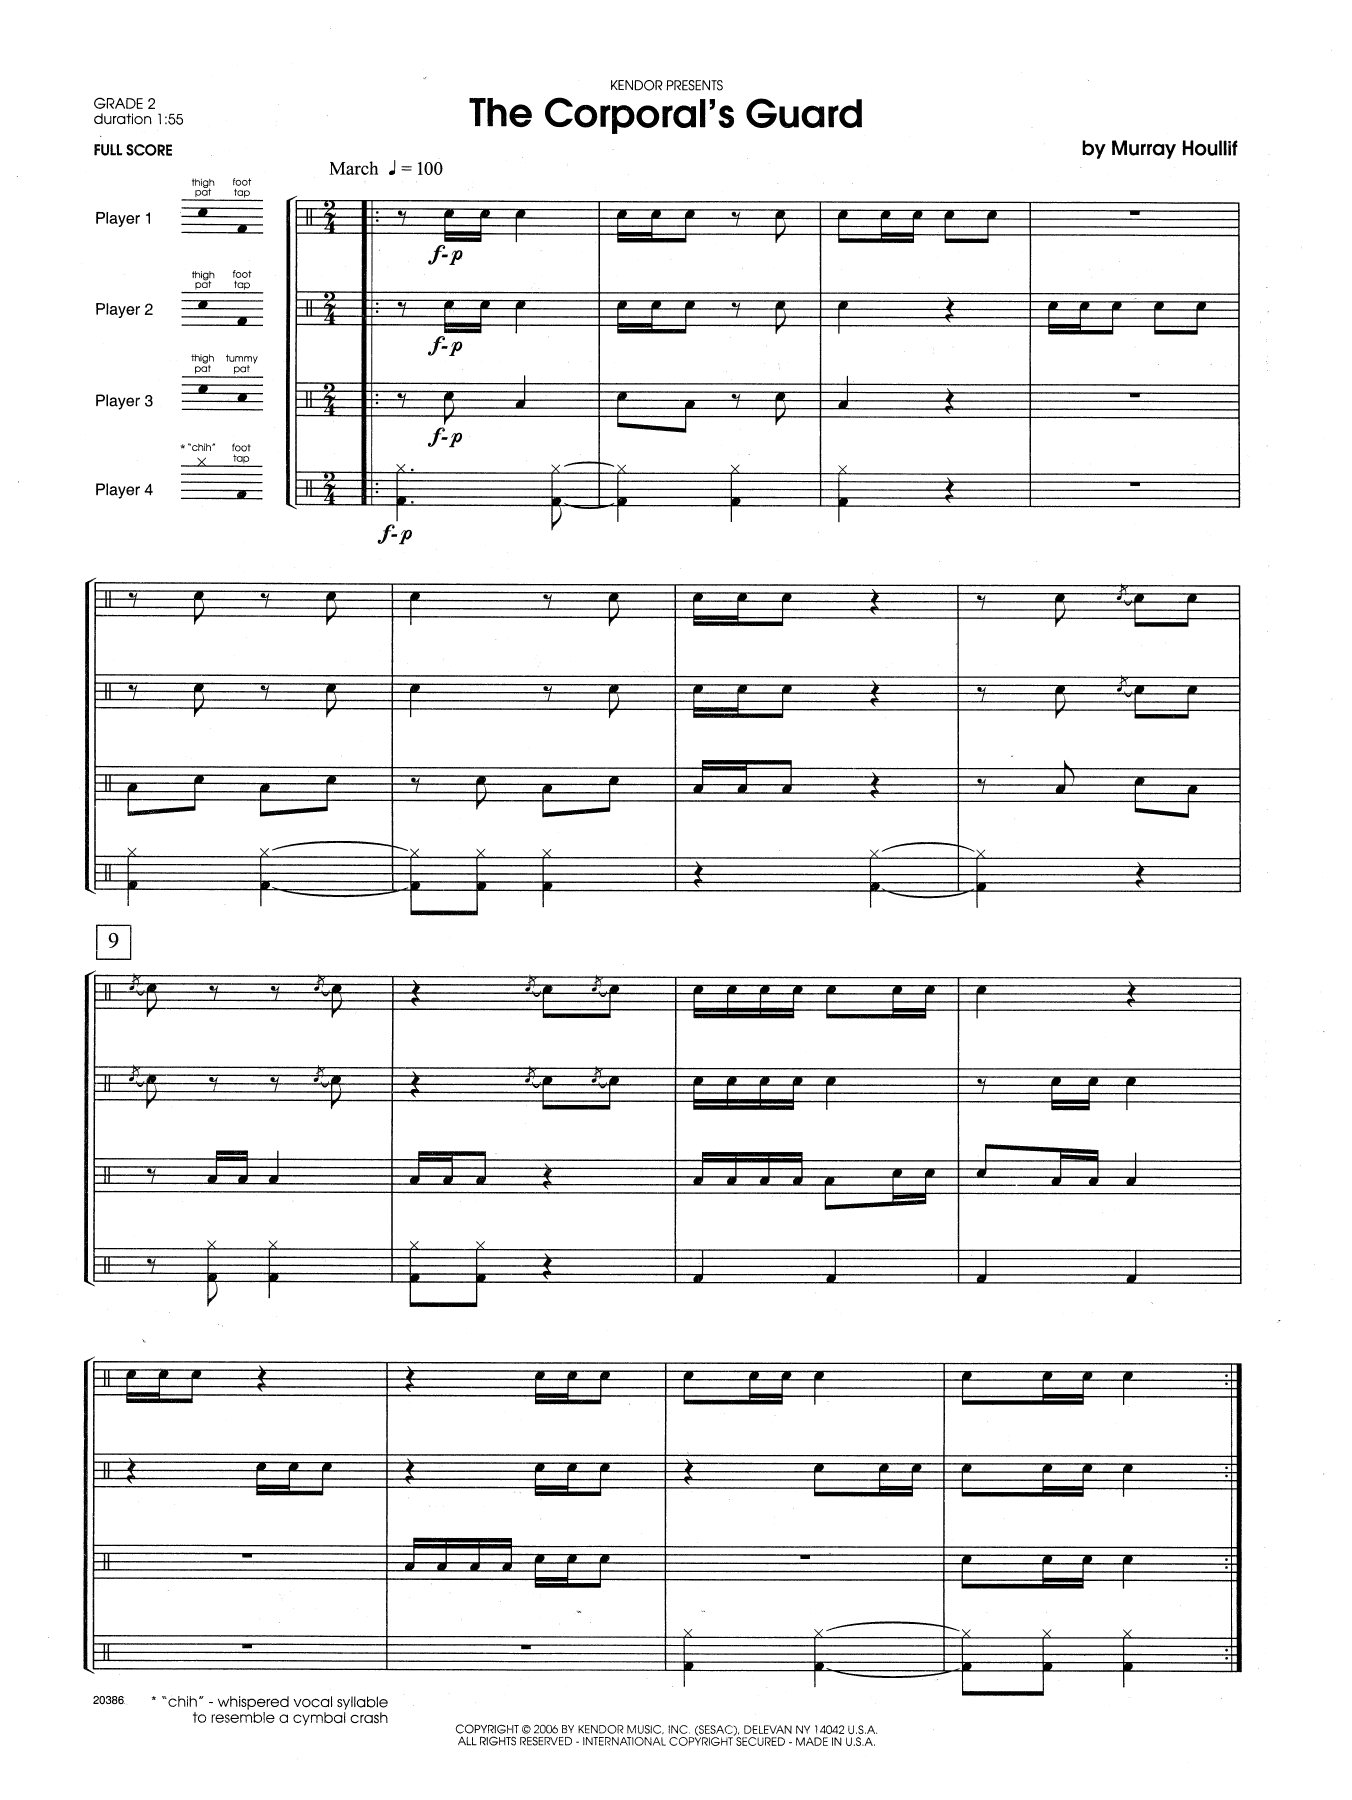 Download Murray Houllif The Corporal's Guard - Full Score Sheet Music